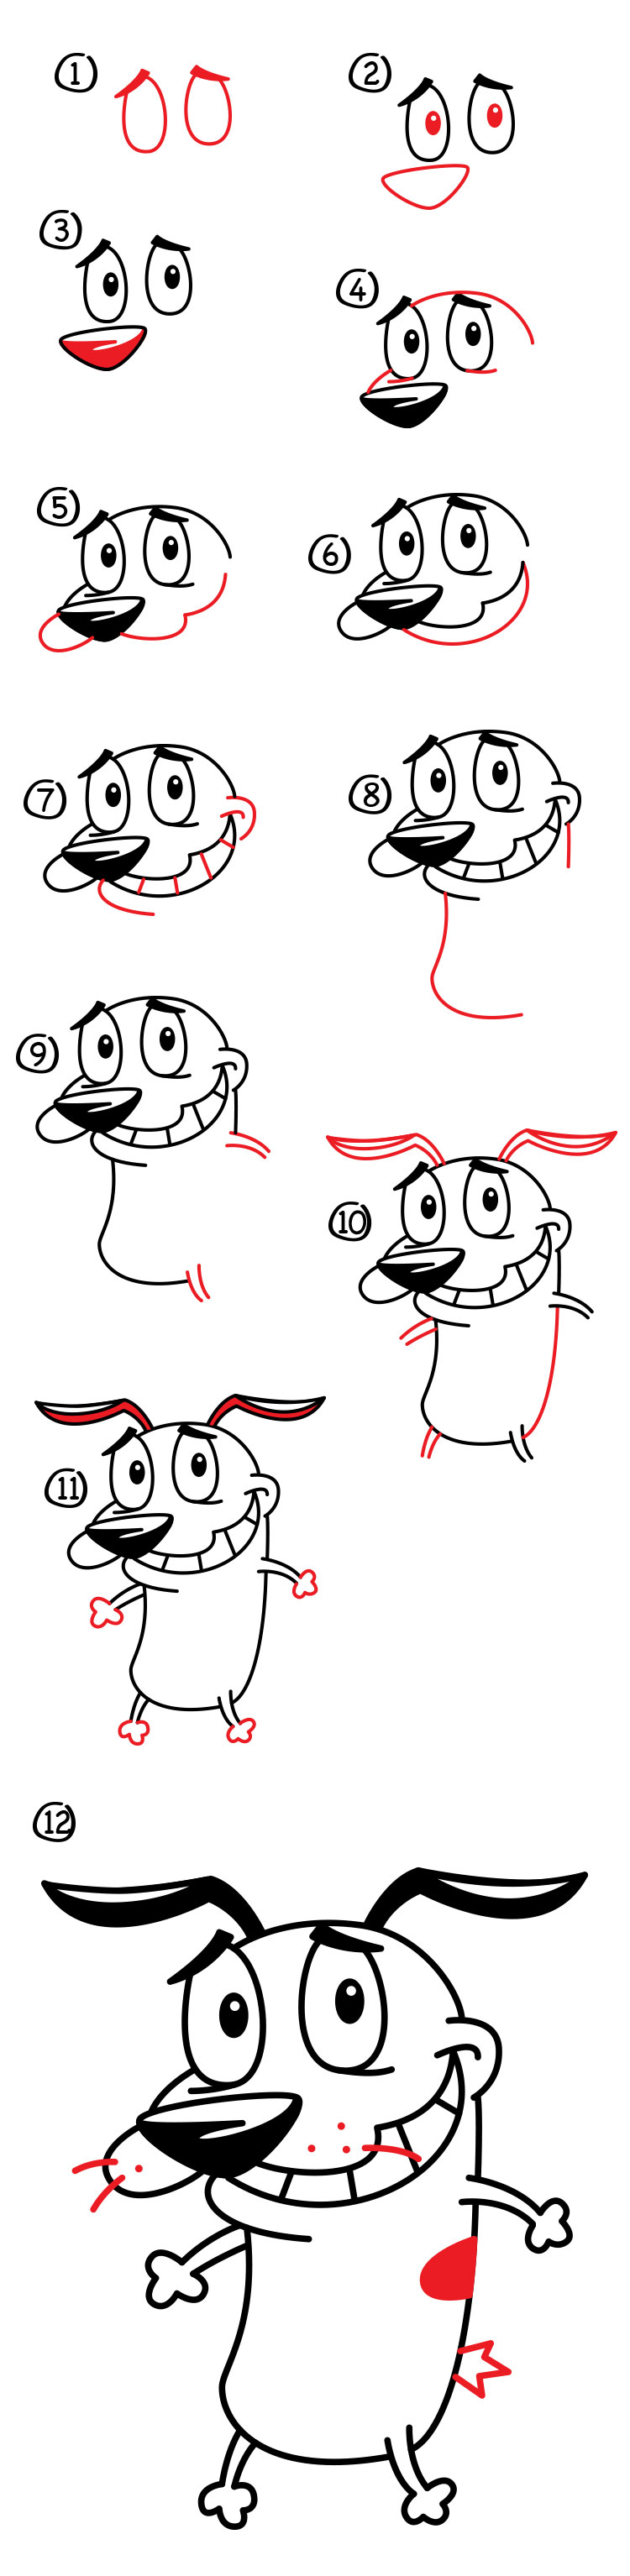 How To Draw Courage The Cowardly Dog - Art For Kids Hub